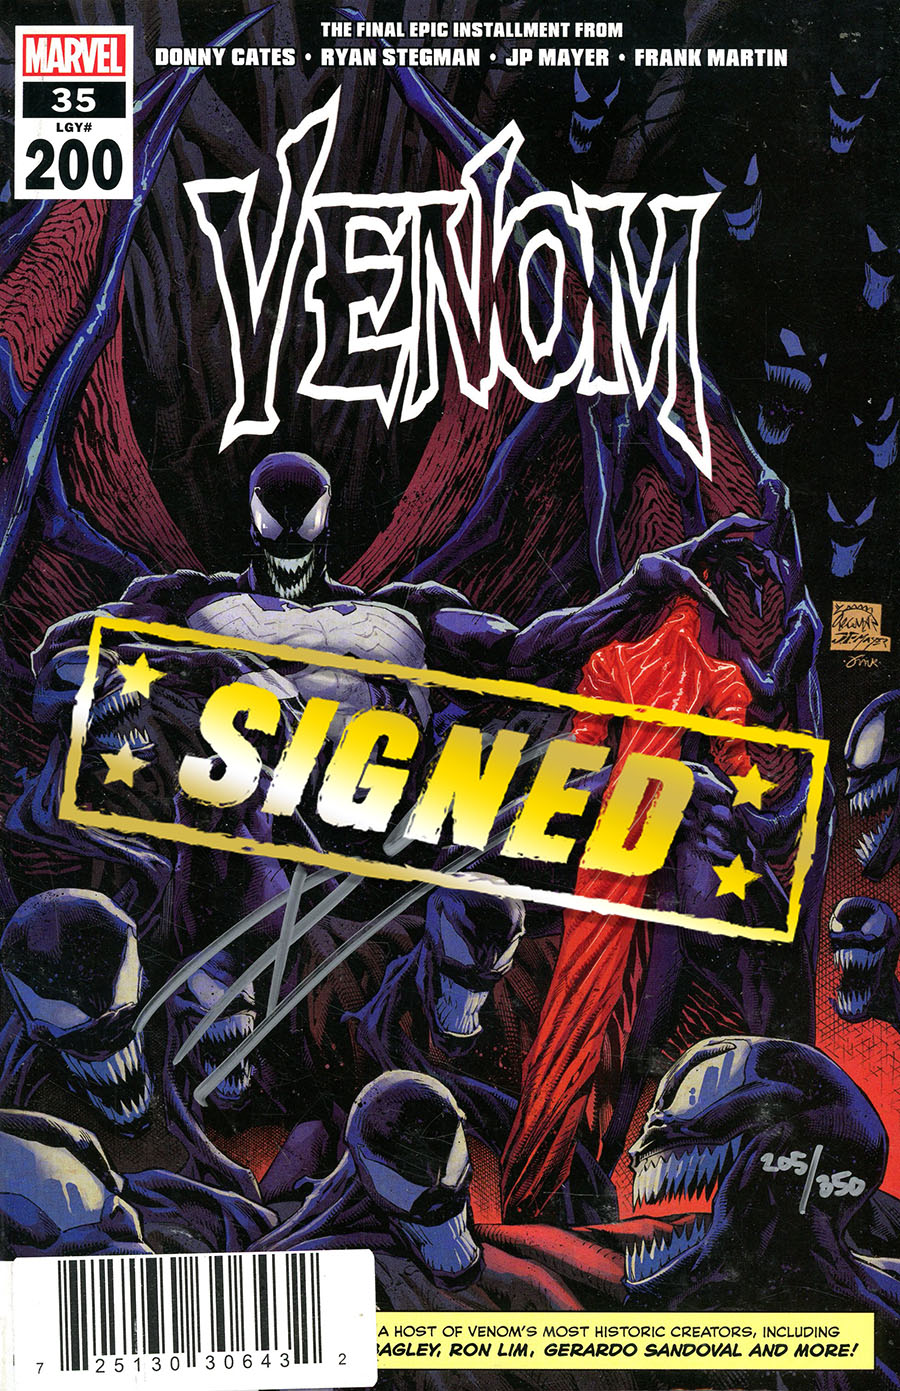 Venom Vol 4 #35 Cover Q DF Signed By Donny Cates (#200)